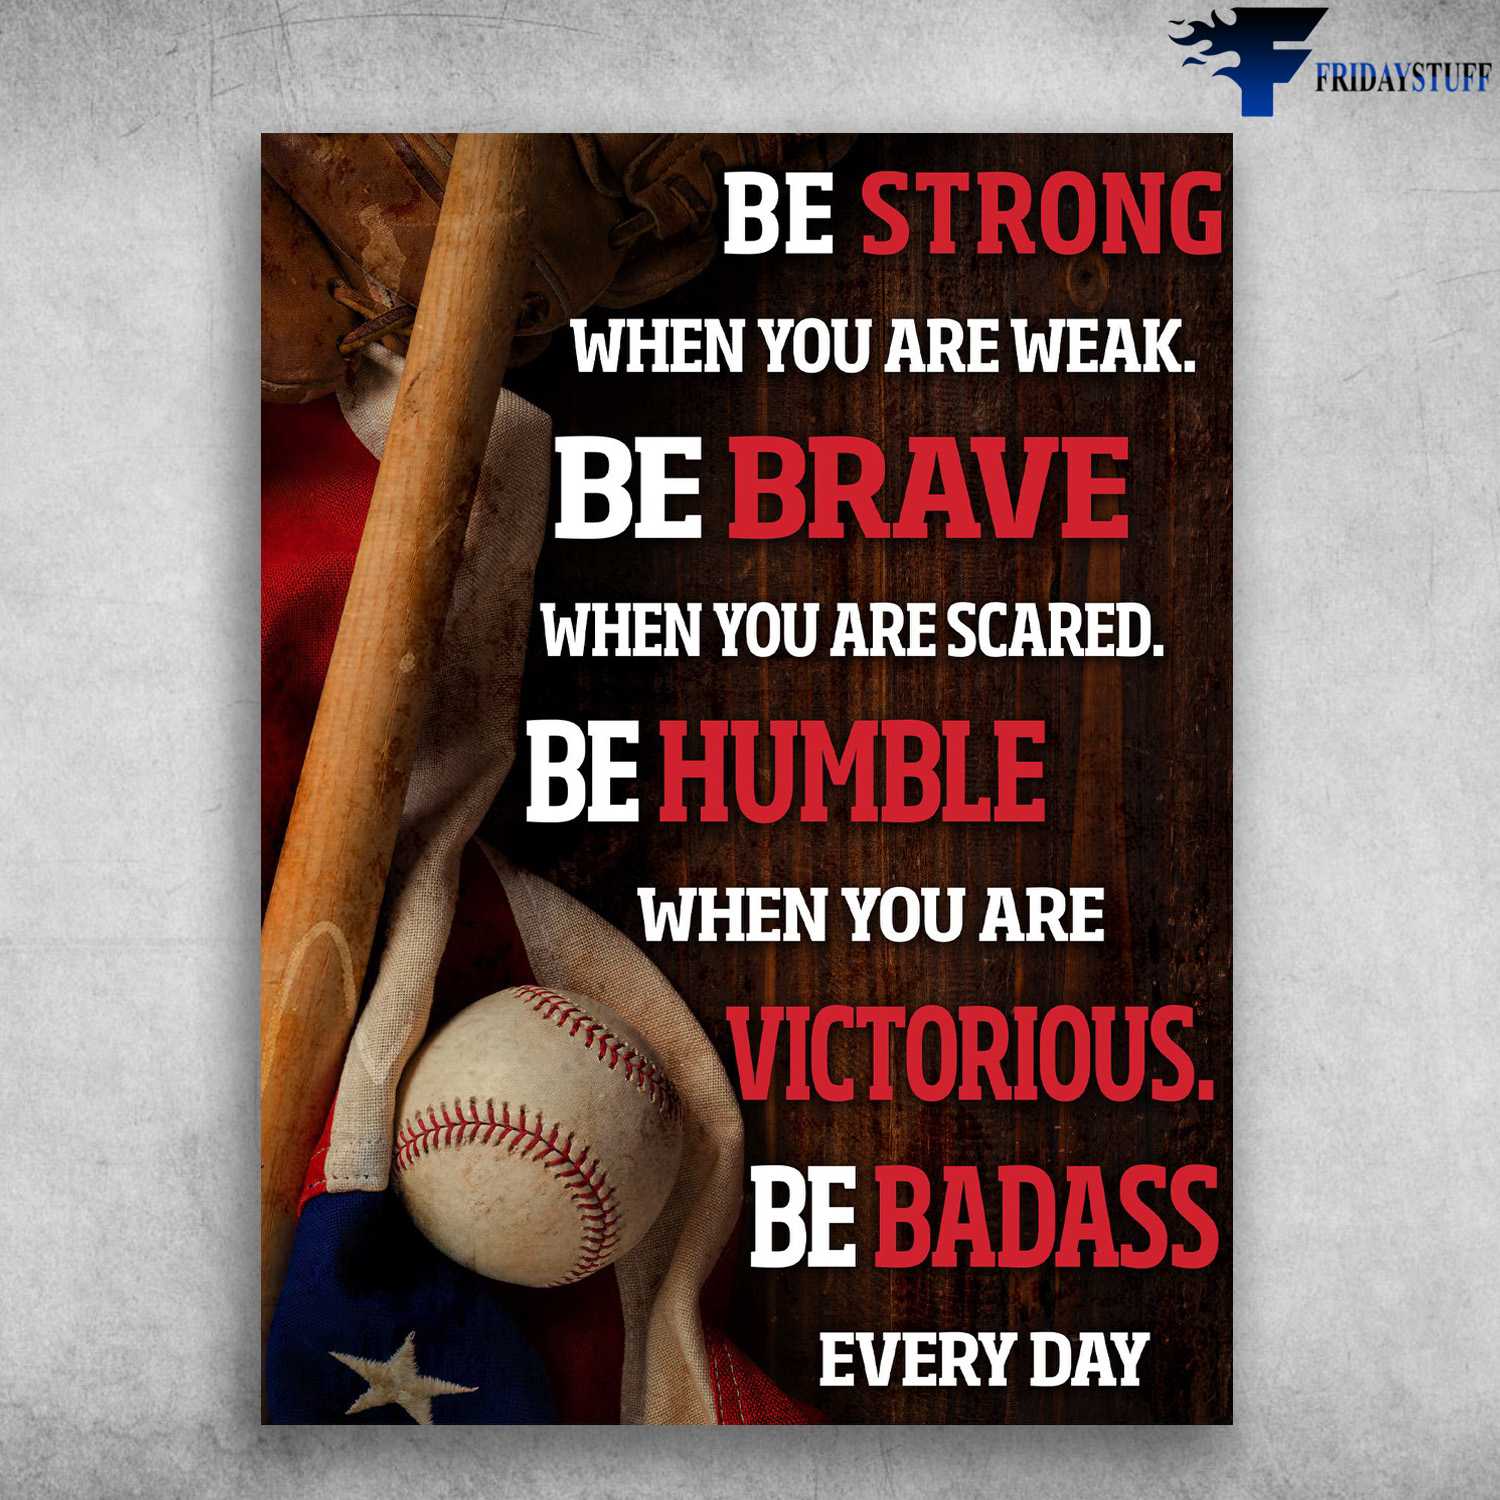 American Baseball, Baseball Poster - Be Strong When You Are Weak, Be Brave When You Are Scared, Be Humble When You Are Victorious, Be Badass Everyday